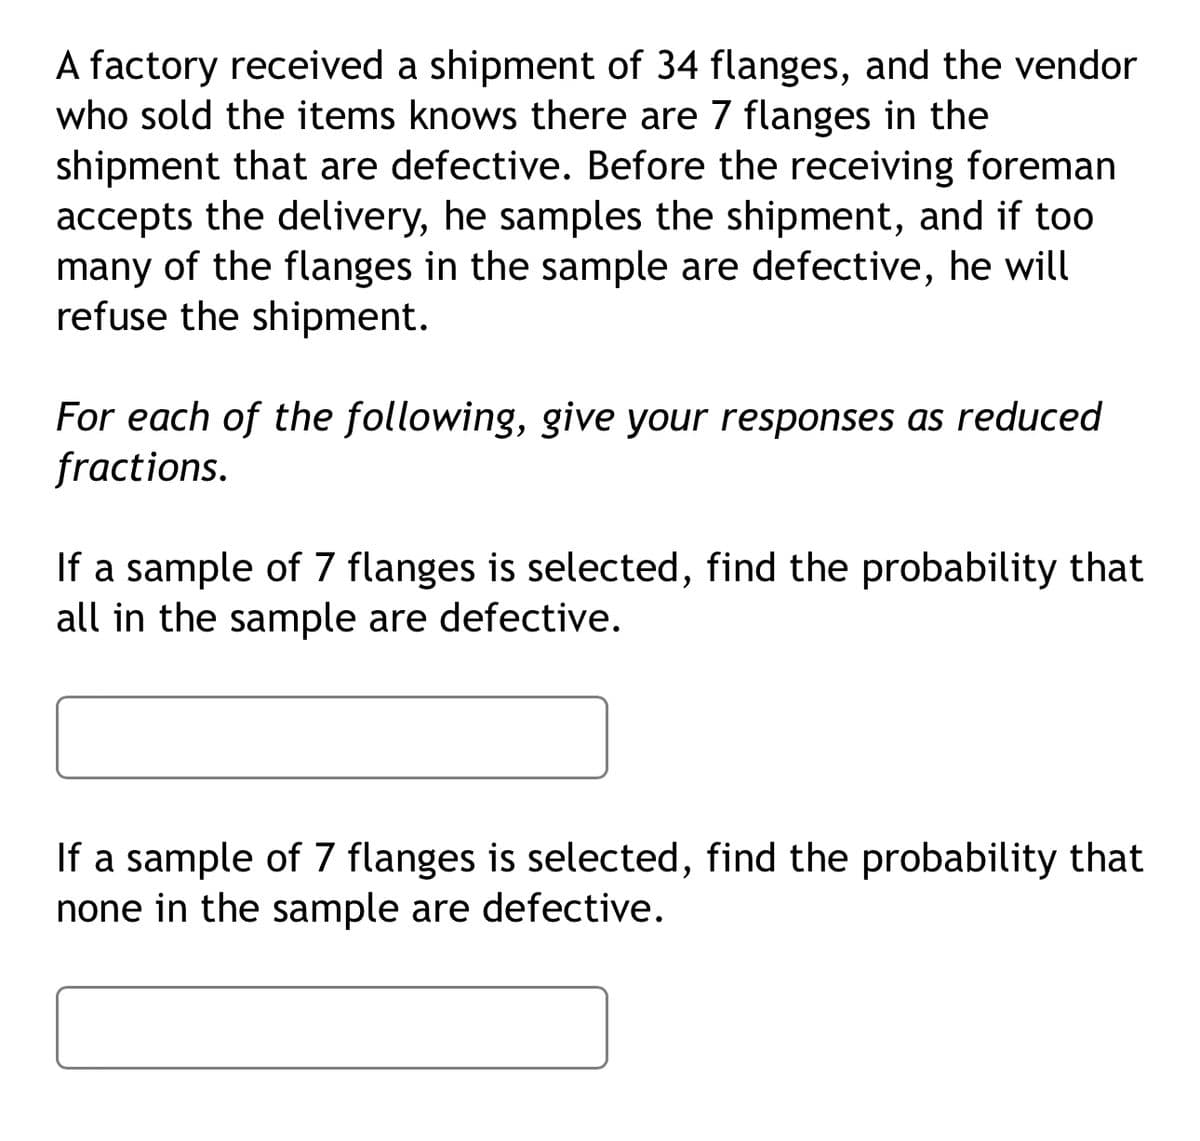 A factory received a shipment of 34 flanges, and the vendor
who sold the items knows there are 7 flanges in the
shipment that are defective. Before the receiving foreman
accepts the delivery, he samples the shipment, and if too
many of the flanges in the sample are defective, he will
refuse the shipment.
For each of the following, give your responses as reduced
fractions.
If a sample of 7 flanges is selected, find the probability that
all in the sample are defective.
If a sample of 7 flanges is selected, find the probability that
none in the sample are defective.